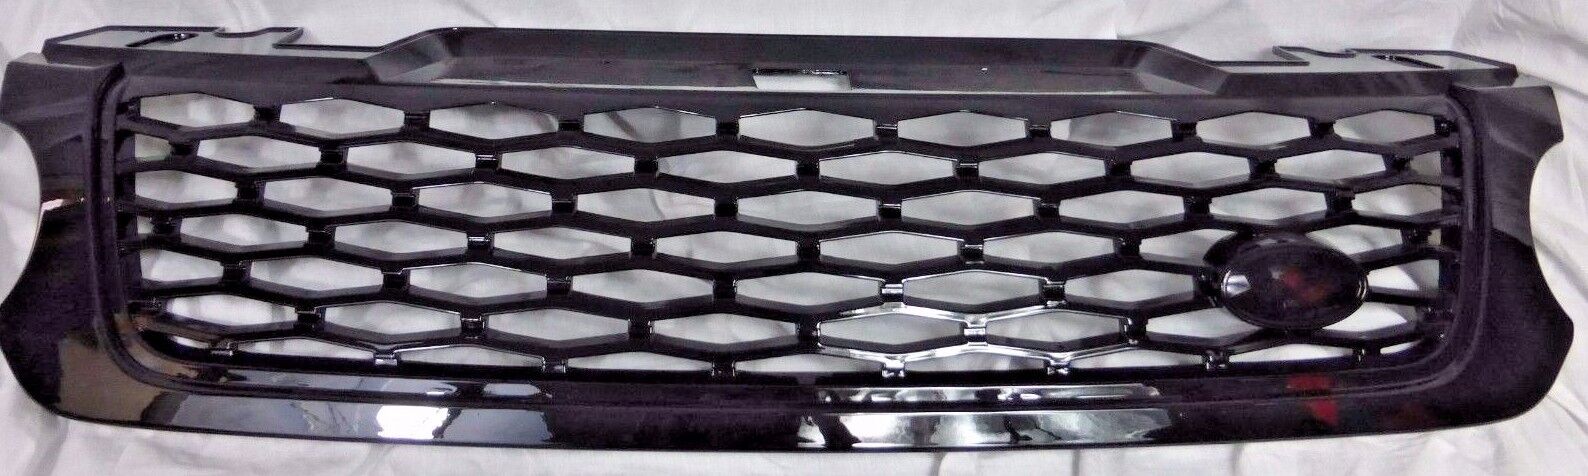 SVR Style Gloss Black Mesh Front Grille Fits 2014-17 Range Rover Sport L494 New